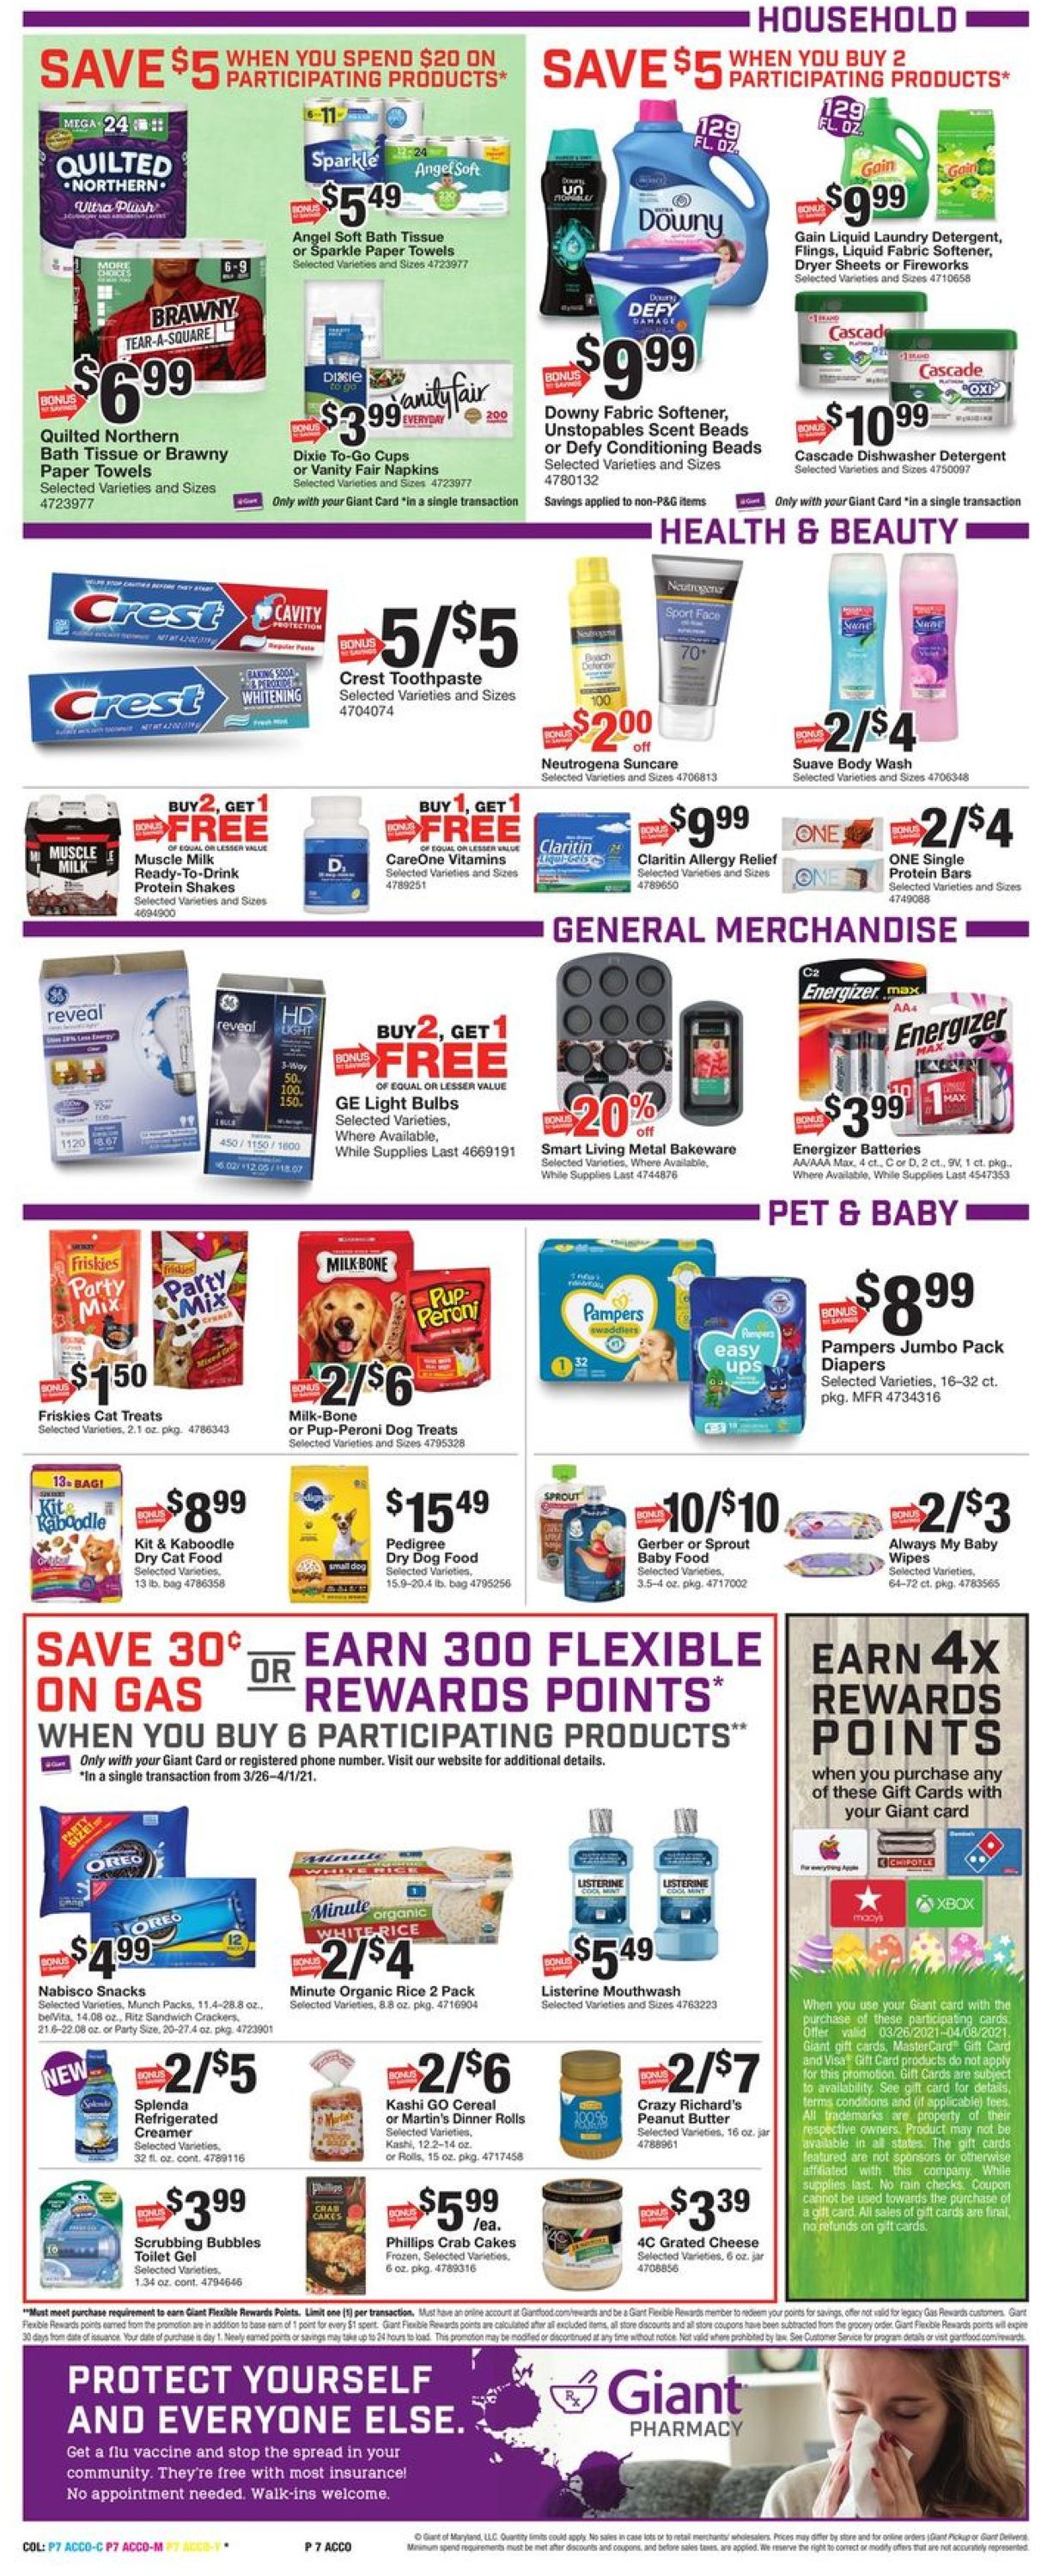 Giant Food - Easter 2021 Ad Weekly Ad Circular - valid 03/26-04/01/2021 (Page 9)